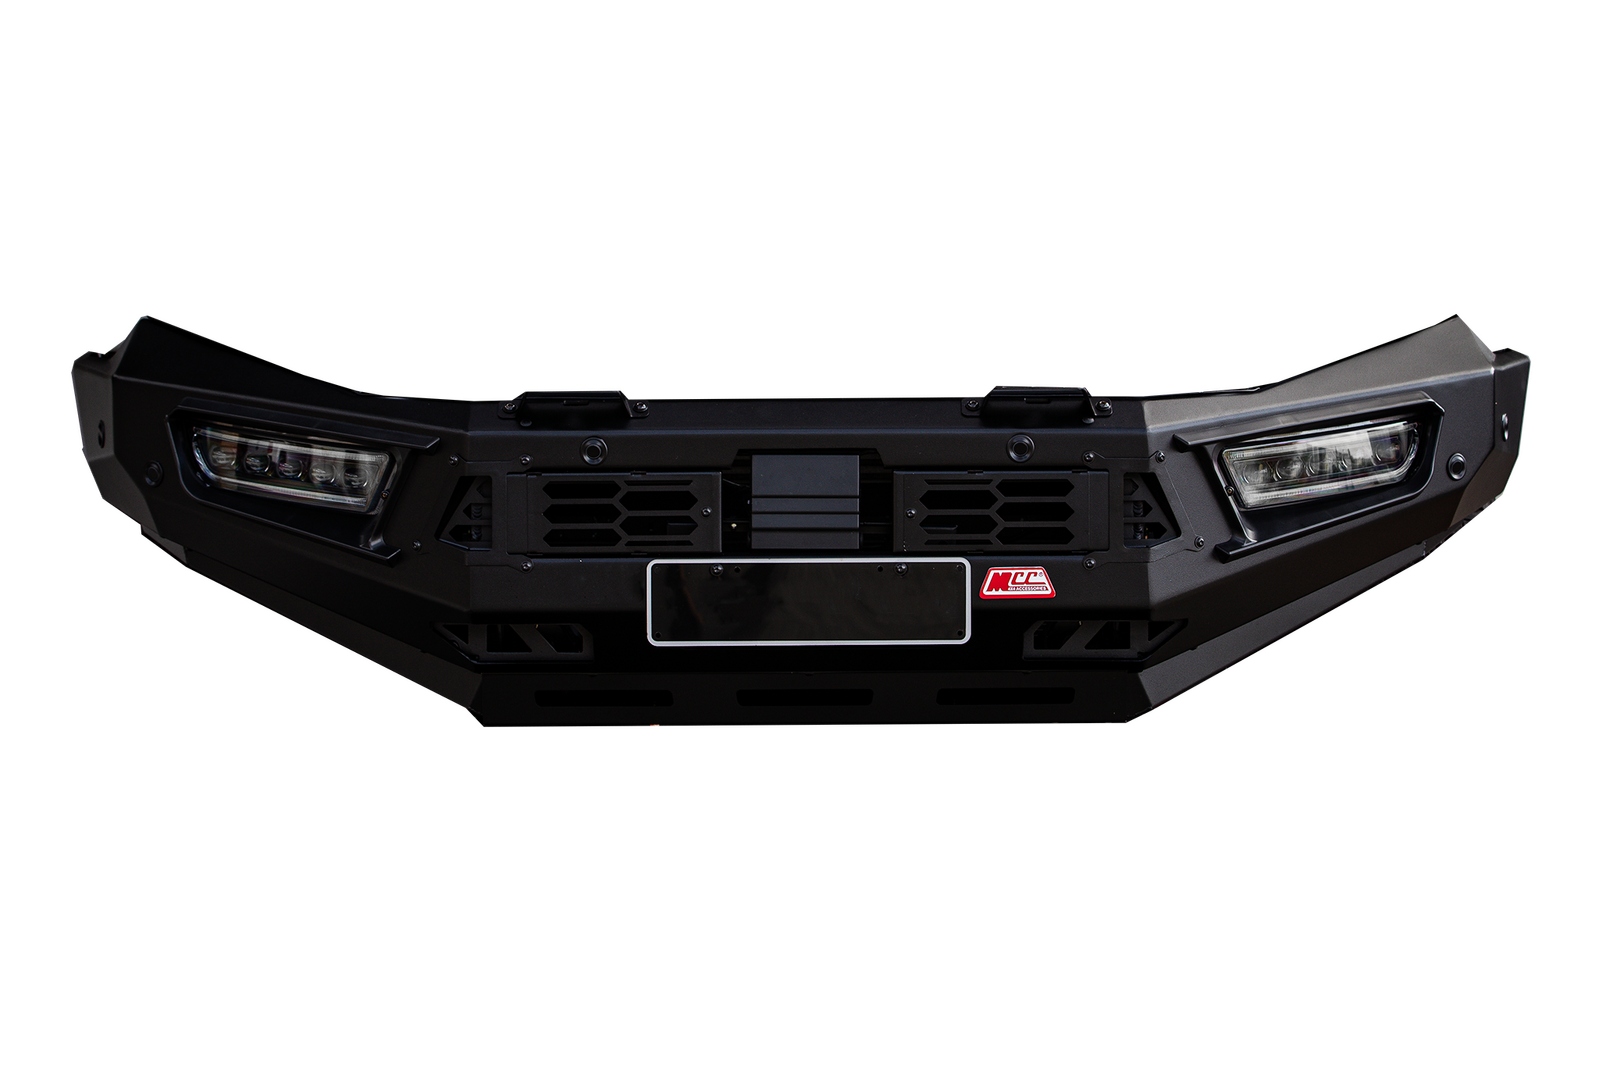 MCC Alloy Pegasus Bull Bar To Suit Ford Ranger PXIII 2019-2021 (Tech Pack)